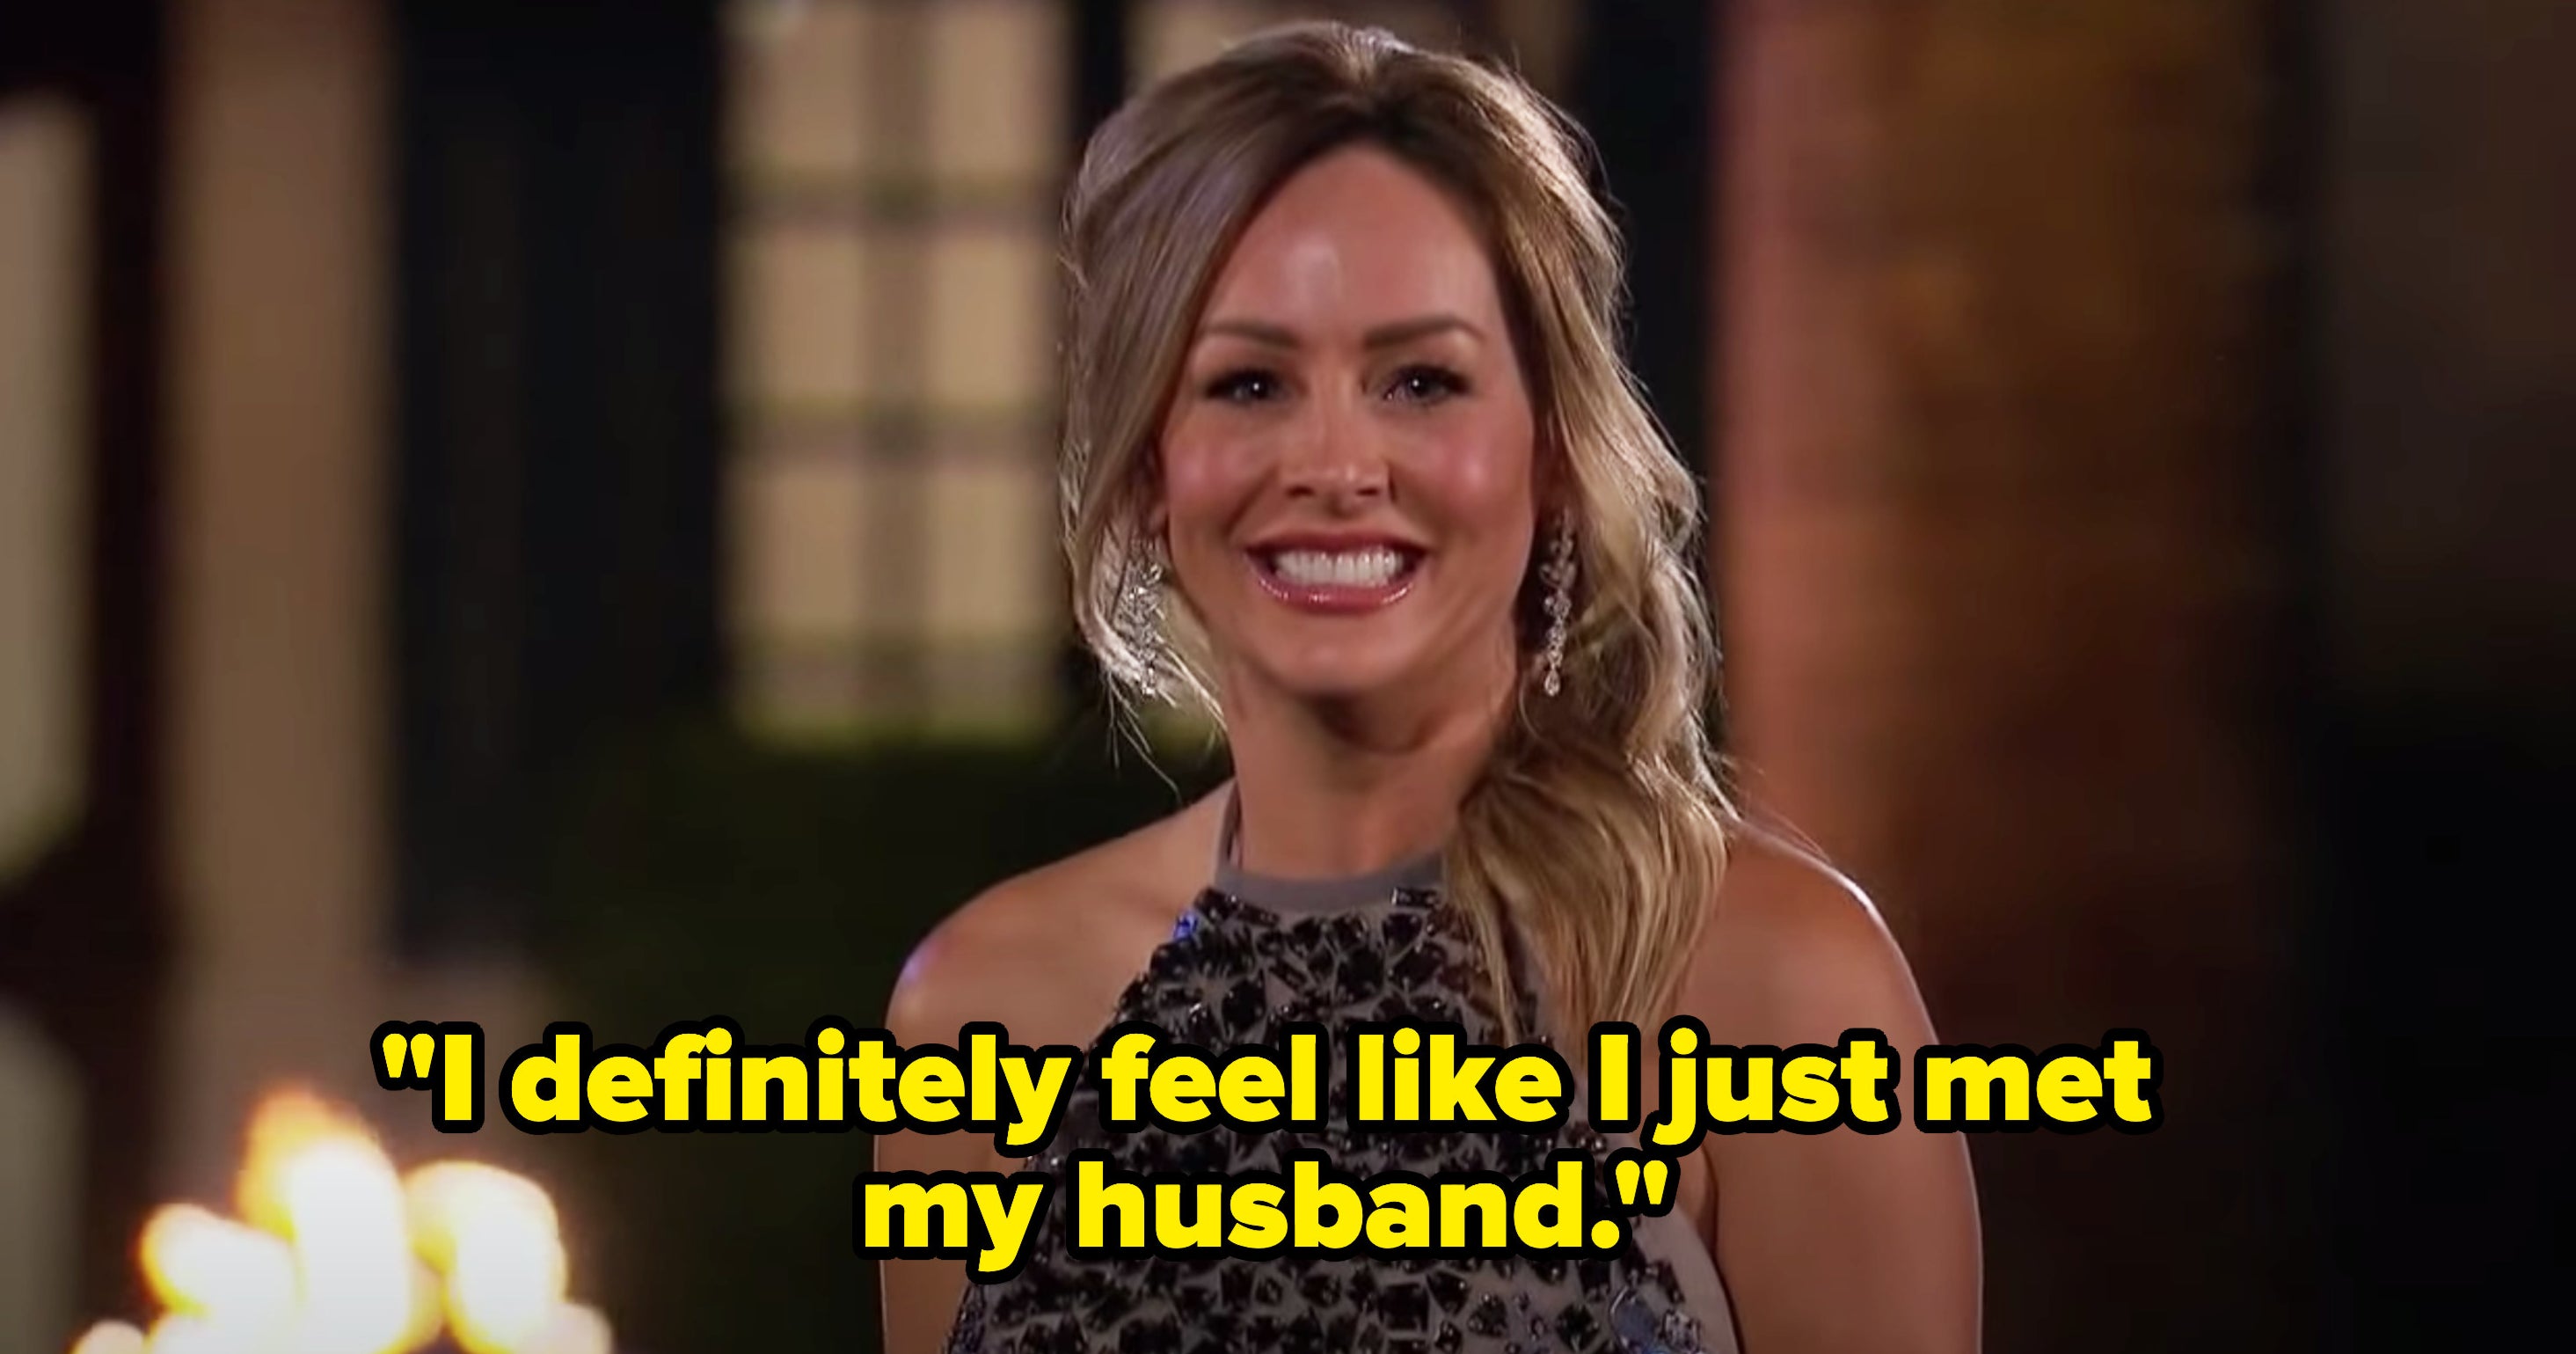 Clare gets emotional as she says &quot;I definitely feel like I just met my husband&quot;